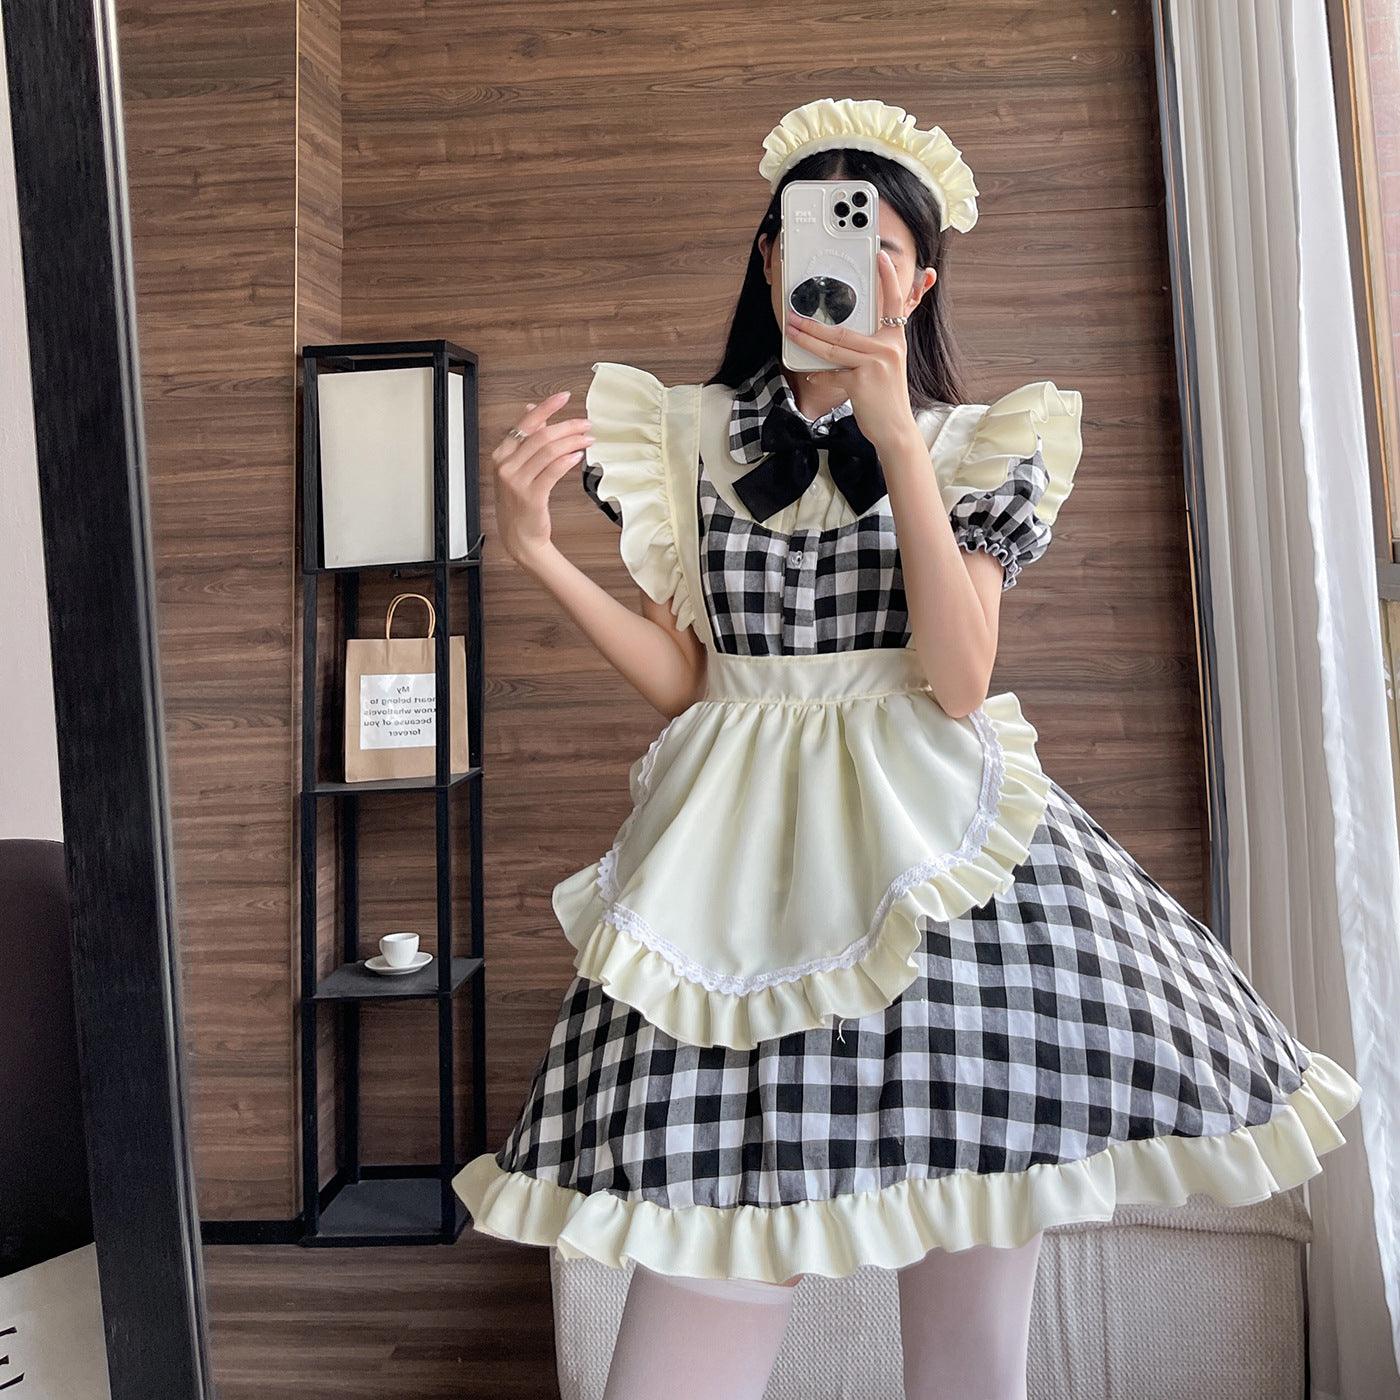 Black Red Grid Large Size Maid Outfit Lolita Dress Crossdresser Cute Fancy Cosplay Costume